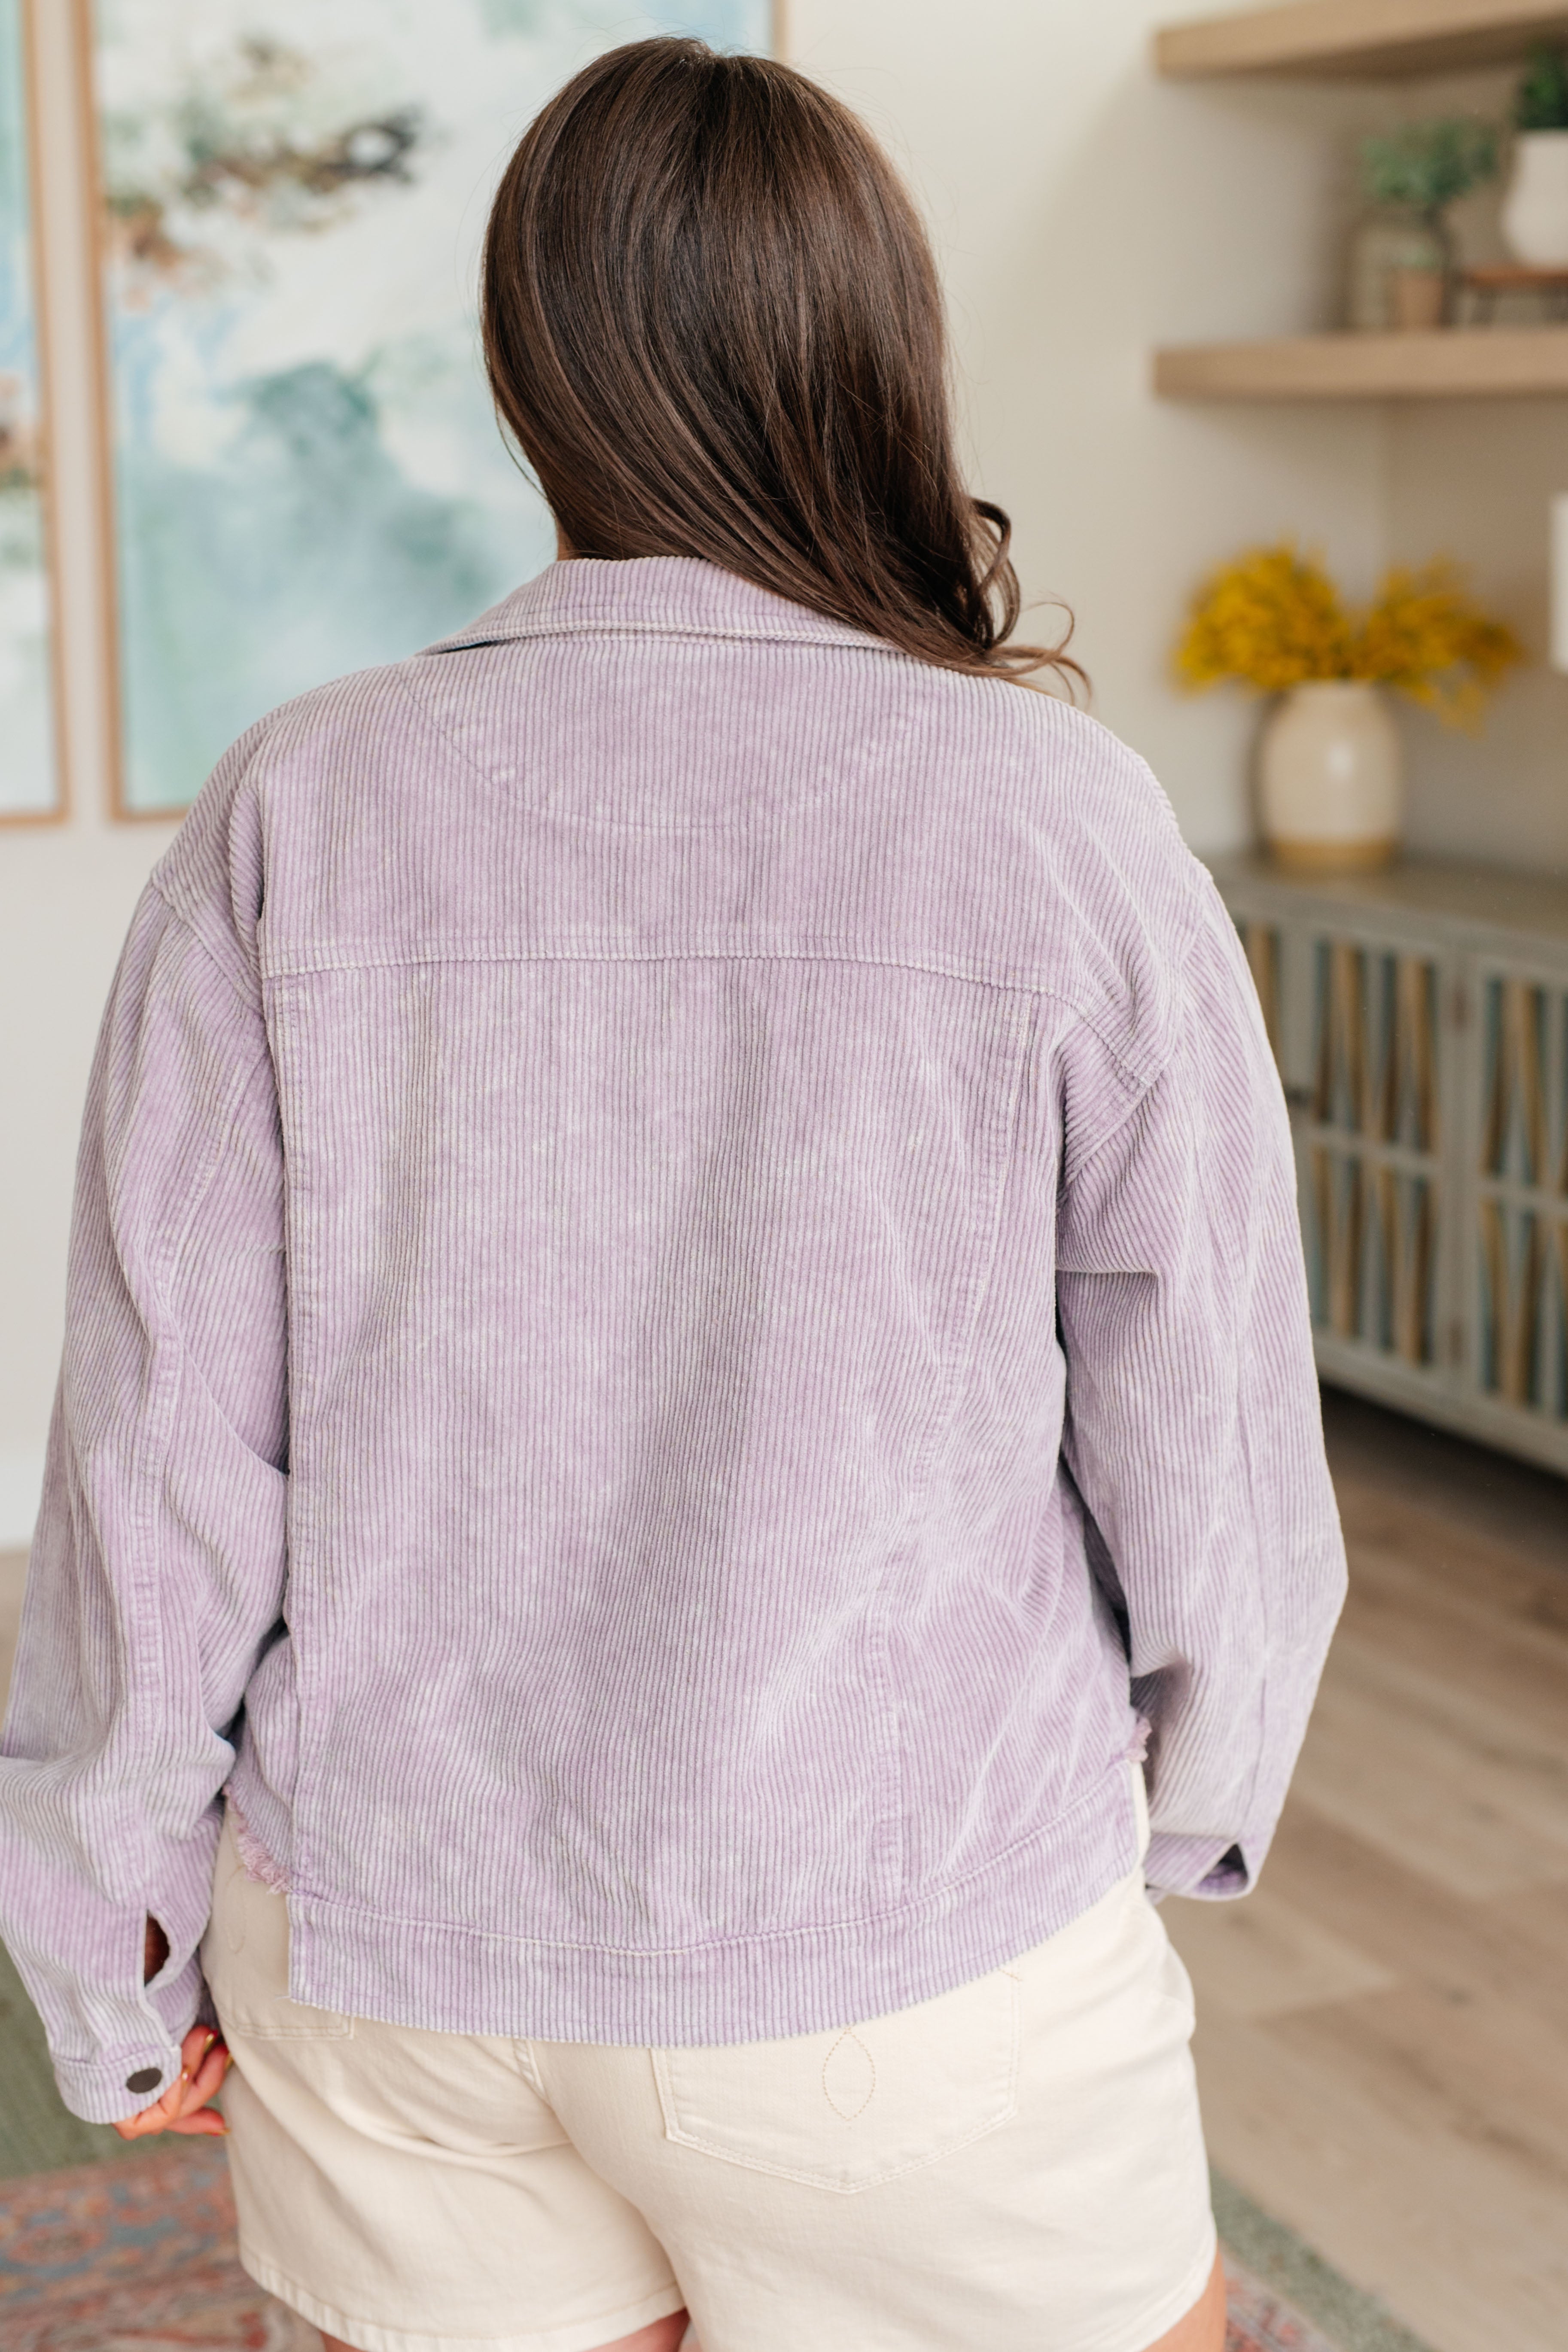 Main Stage Corduroy Jacket in Lavender Layers Ave Shops   